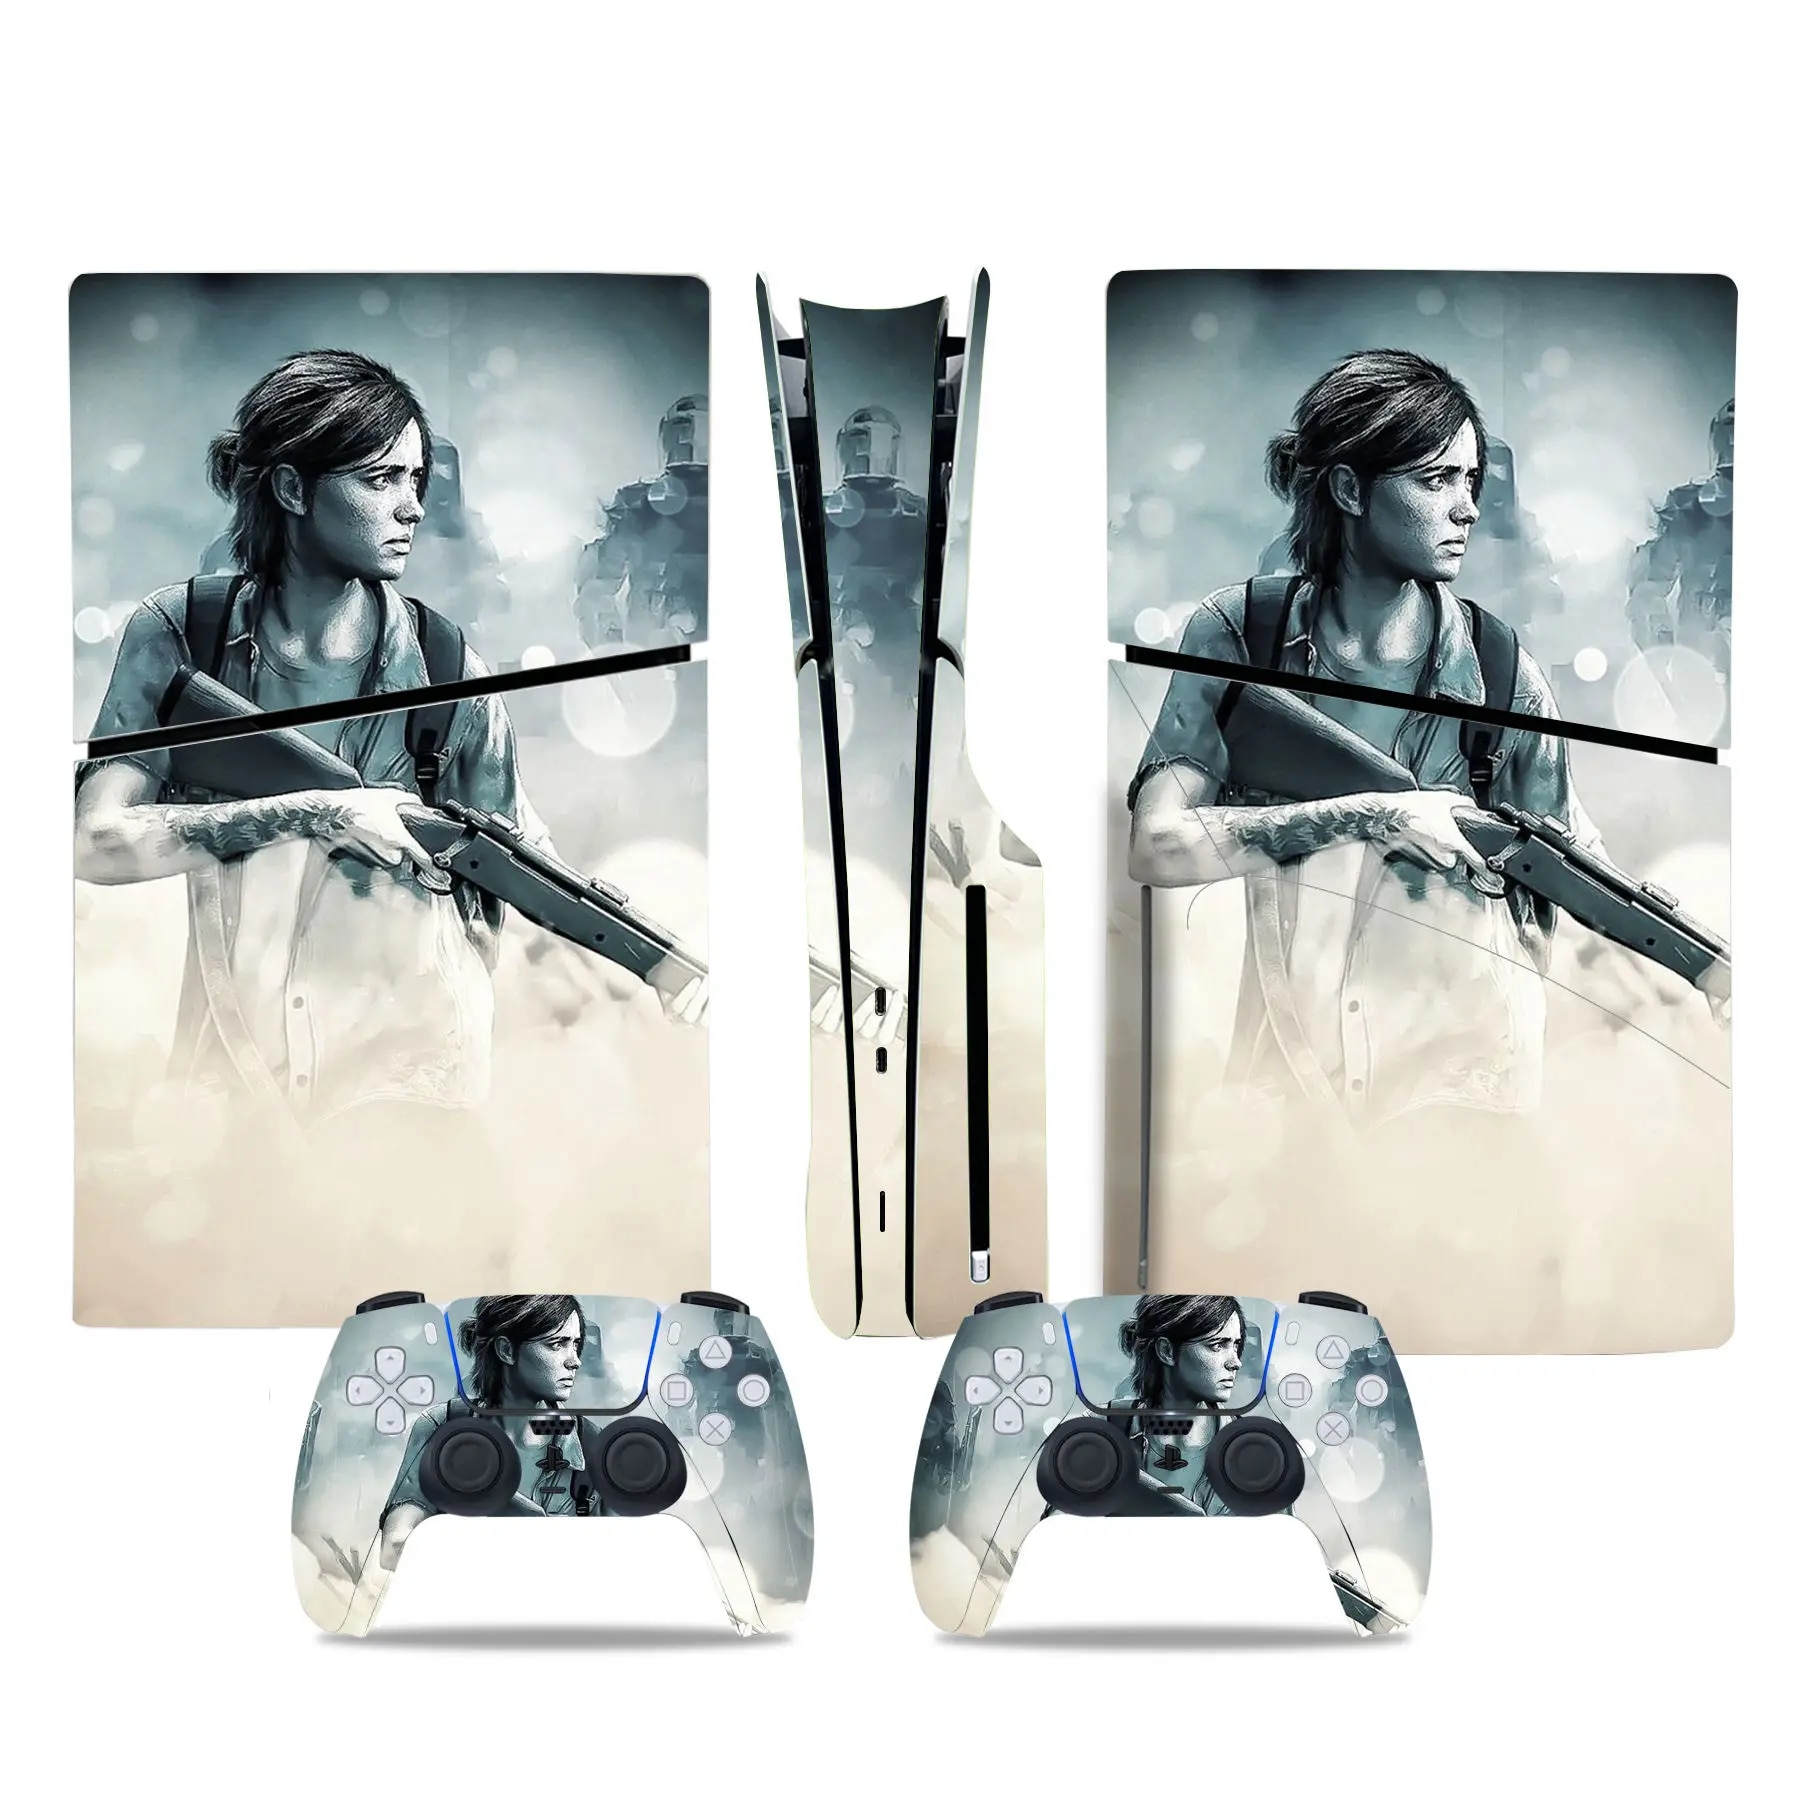 【Big-Sales】 Gamegenixx Ps5 Disc Skin Sticker Cool Design Vinyl Decal Cover Full Set For Ps5 Disc Console And 2 Controllers